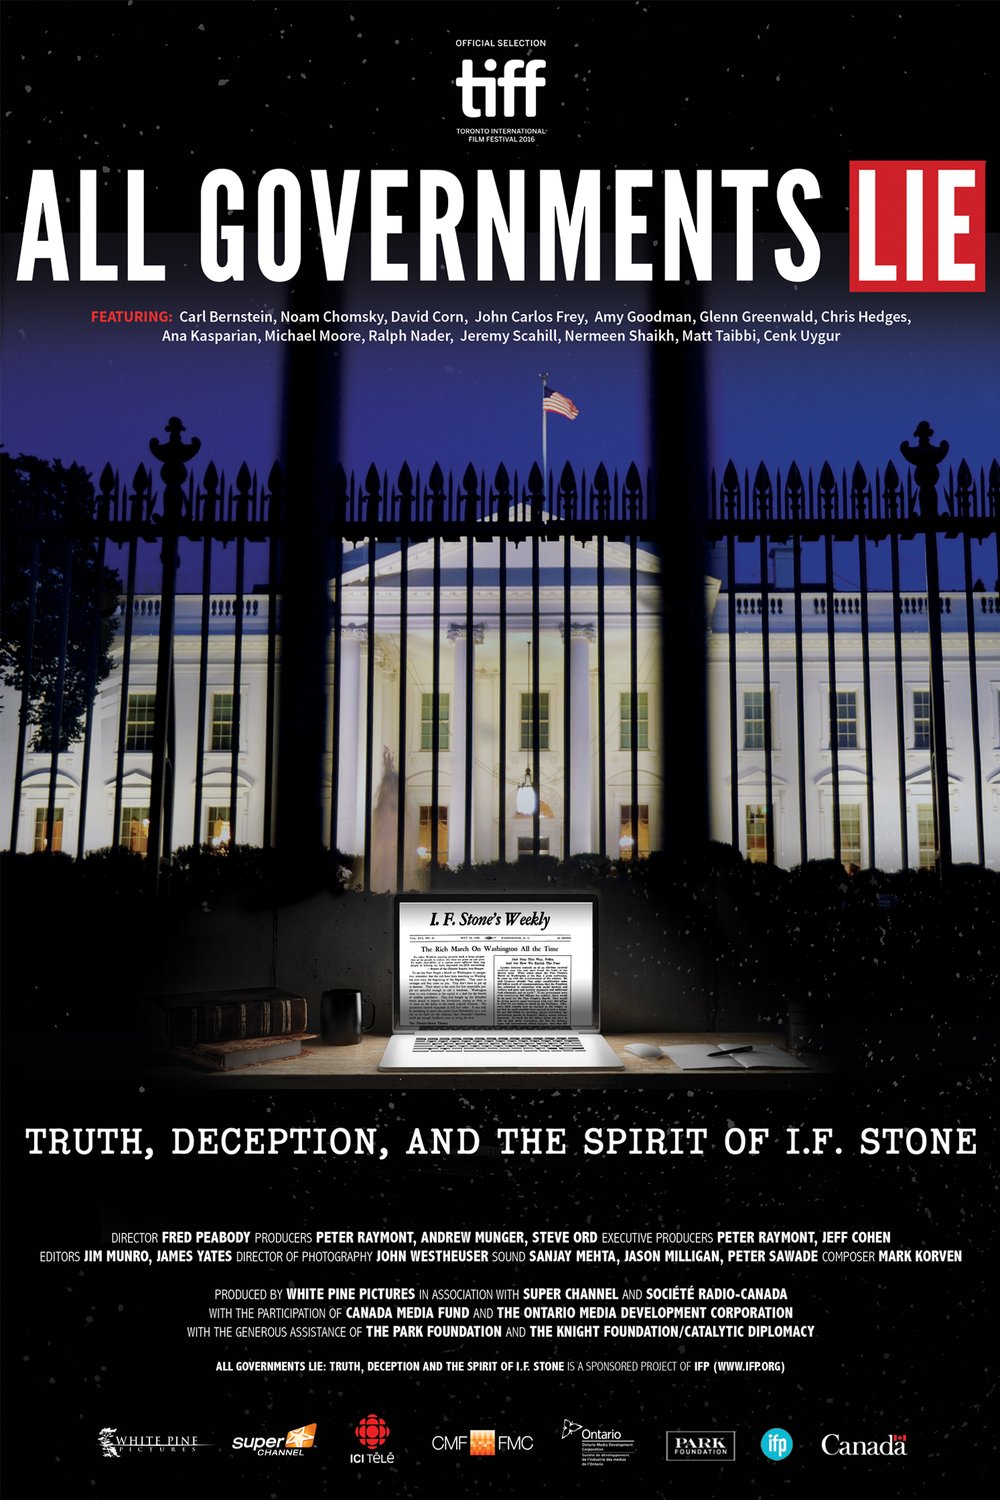 L'affiche du film All Governments Lie: Truth, Deception, and the Spirit of I.F. Stone